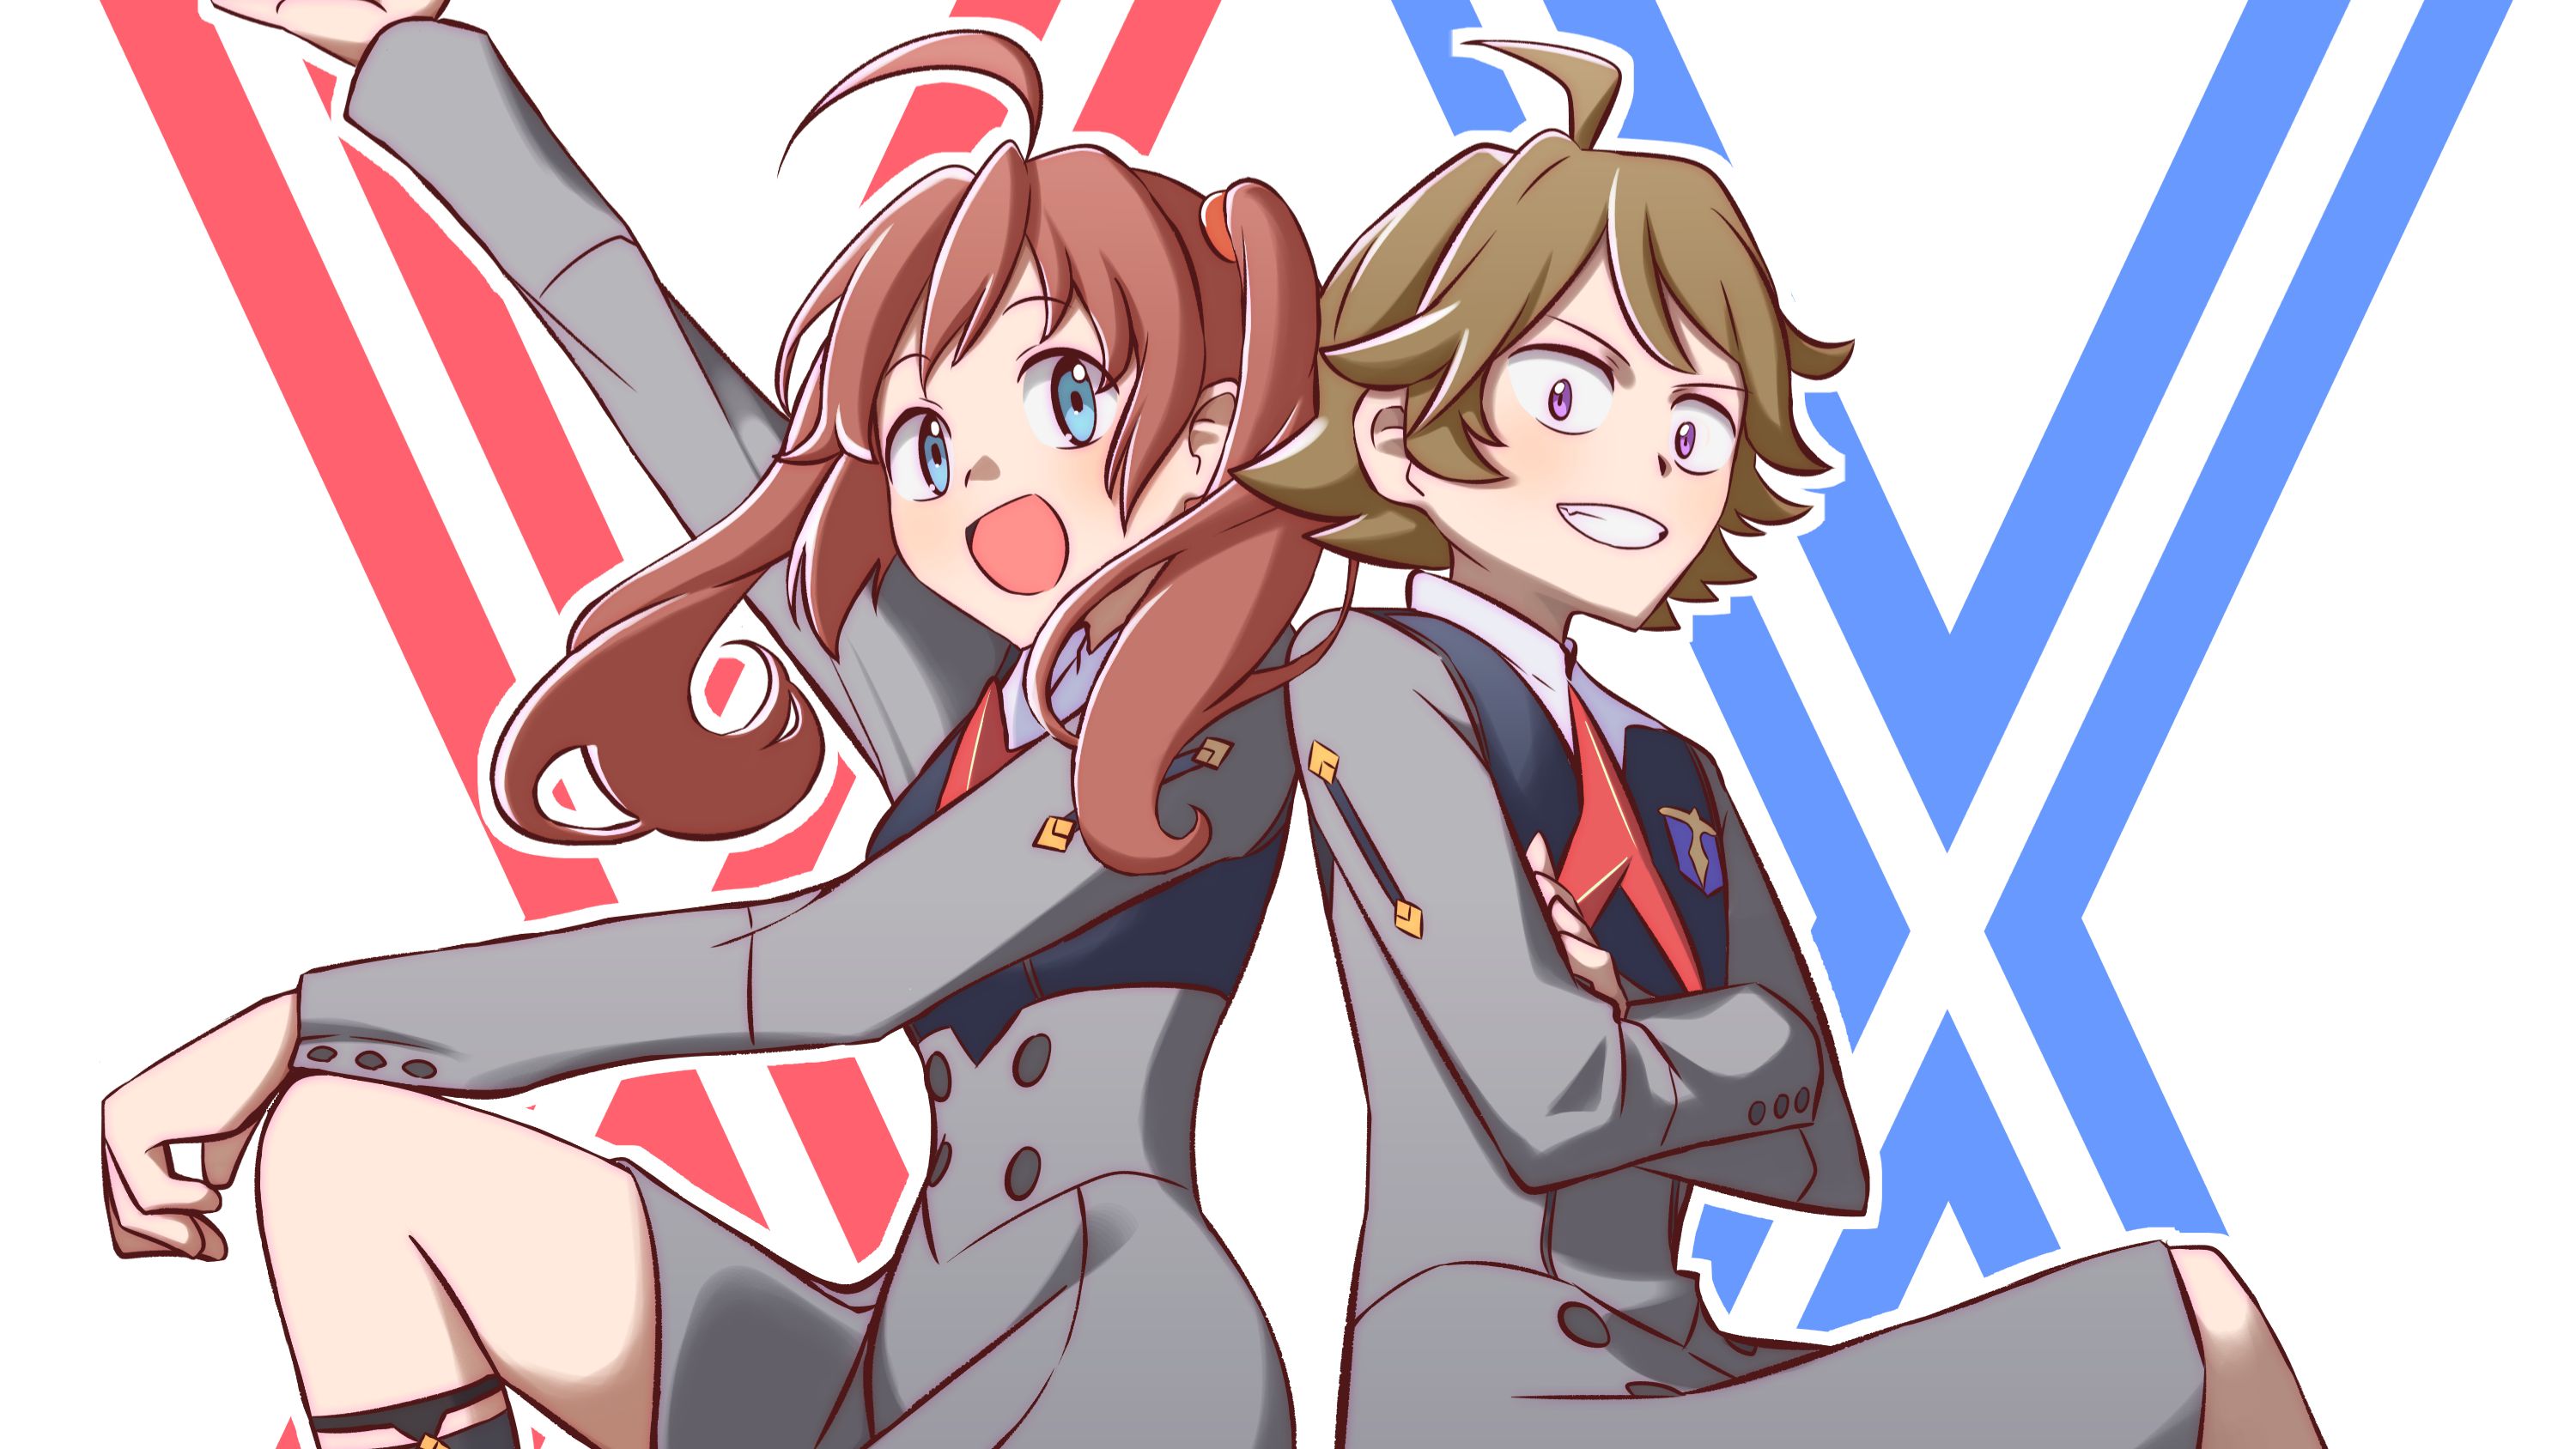  Zorome (Darling In The Franxx) Cellphone FHD pic